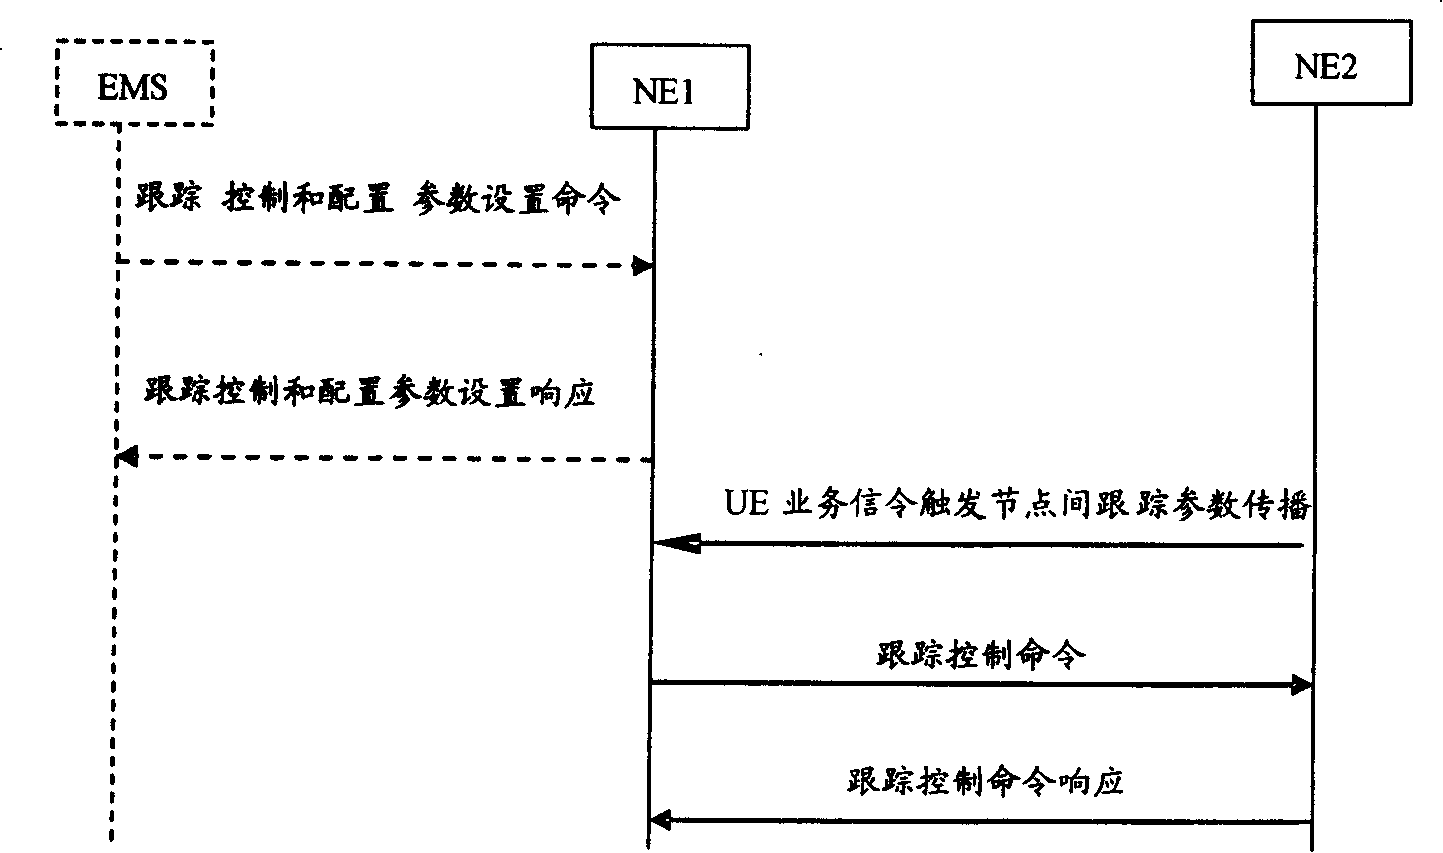 Signaling tracking method, system and network node upon user switching